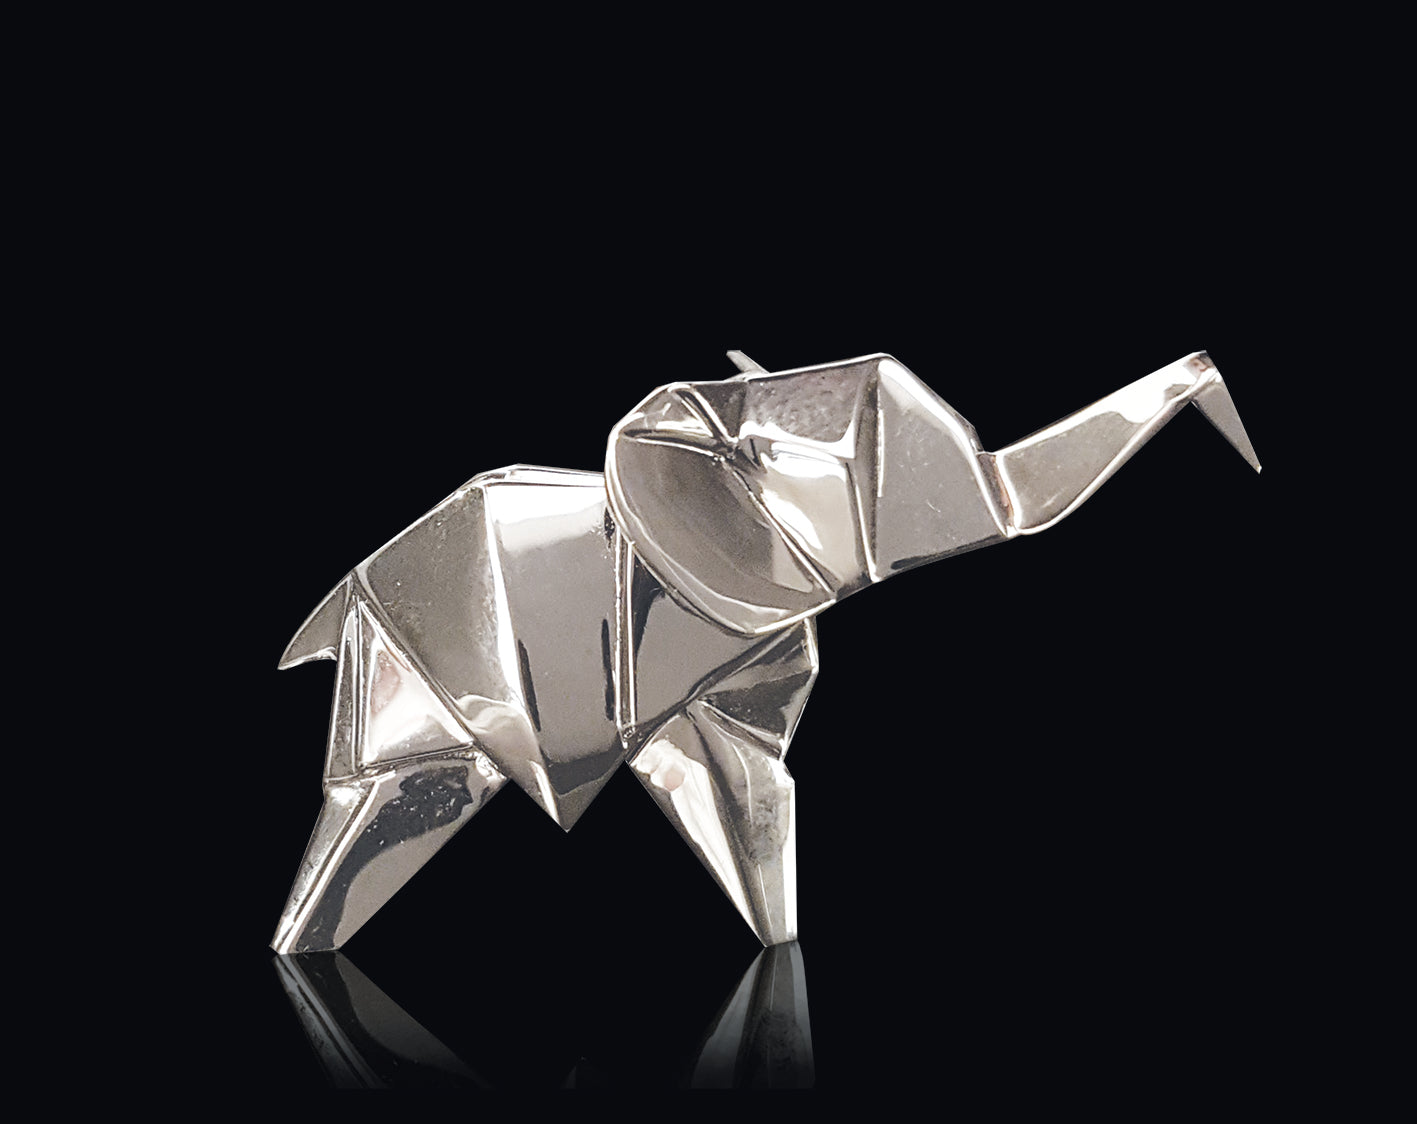 Elephant Sterling Silver Origami Sculpture by Sophie Mackrell